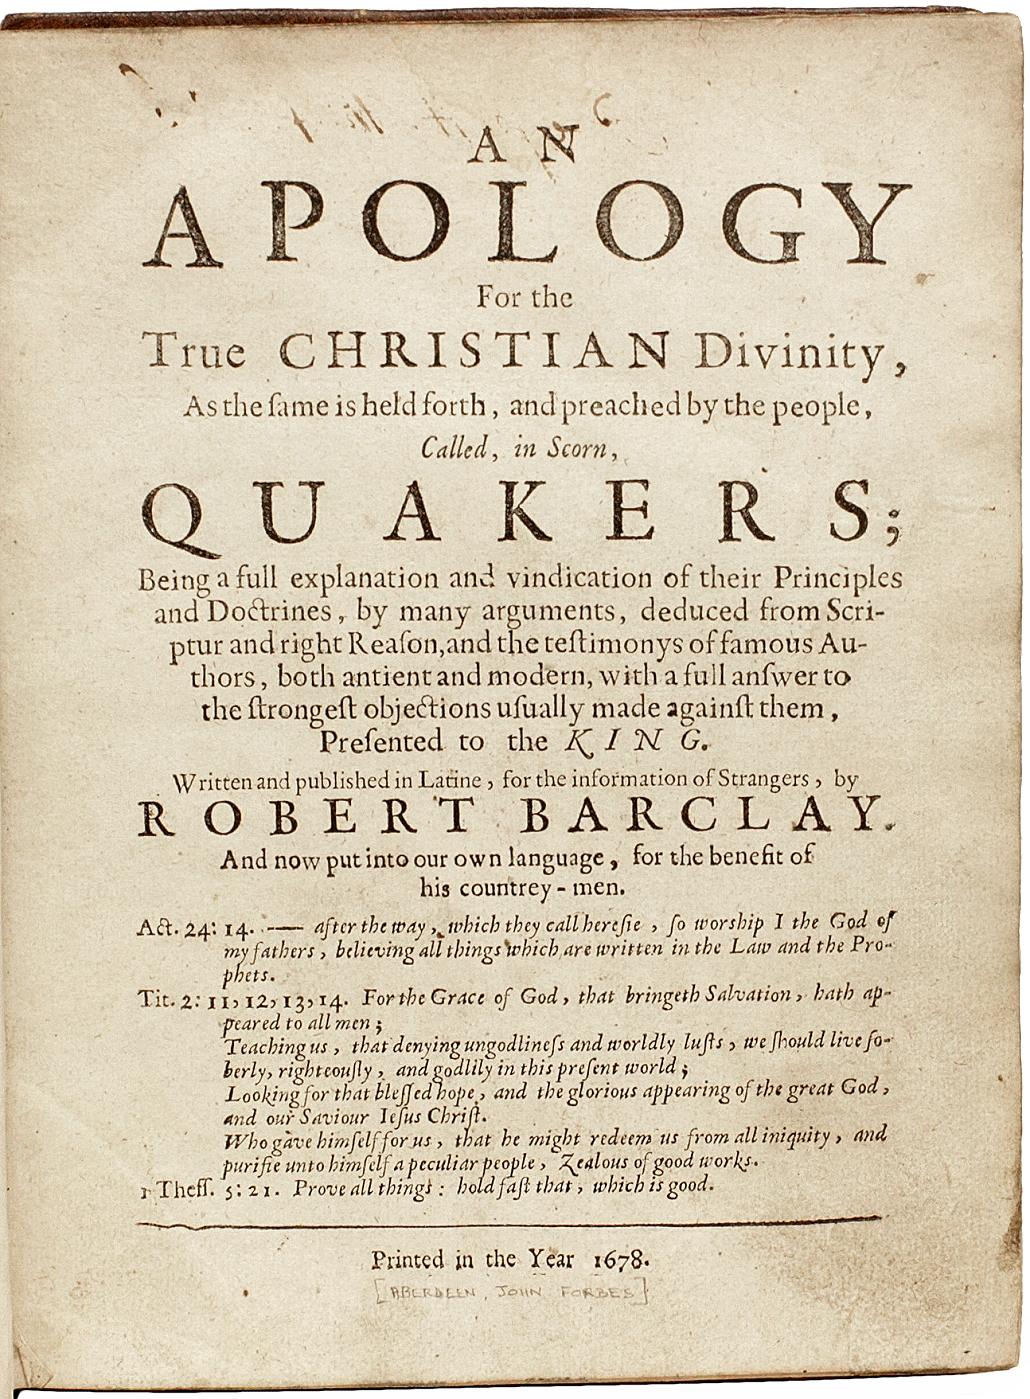 AUTHOR: BARCLAY, Robert. 

TITLE: An Apology for the True Christian Divinity, as the Same Is Held Forth, and Preached by the People, Called, in Scorn, Quakers.

PUBLISHER: [Aberdeen(?): John Forbes(?)], 1678.

DESCRIPTION: FIRST EDITION IN ENGLISH.